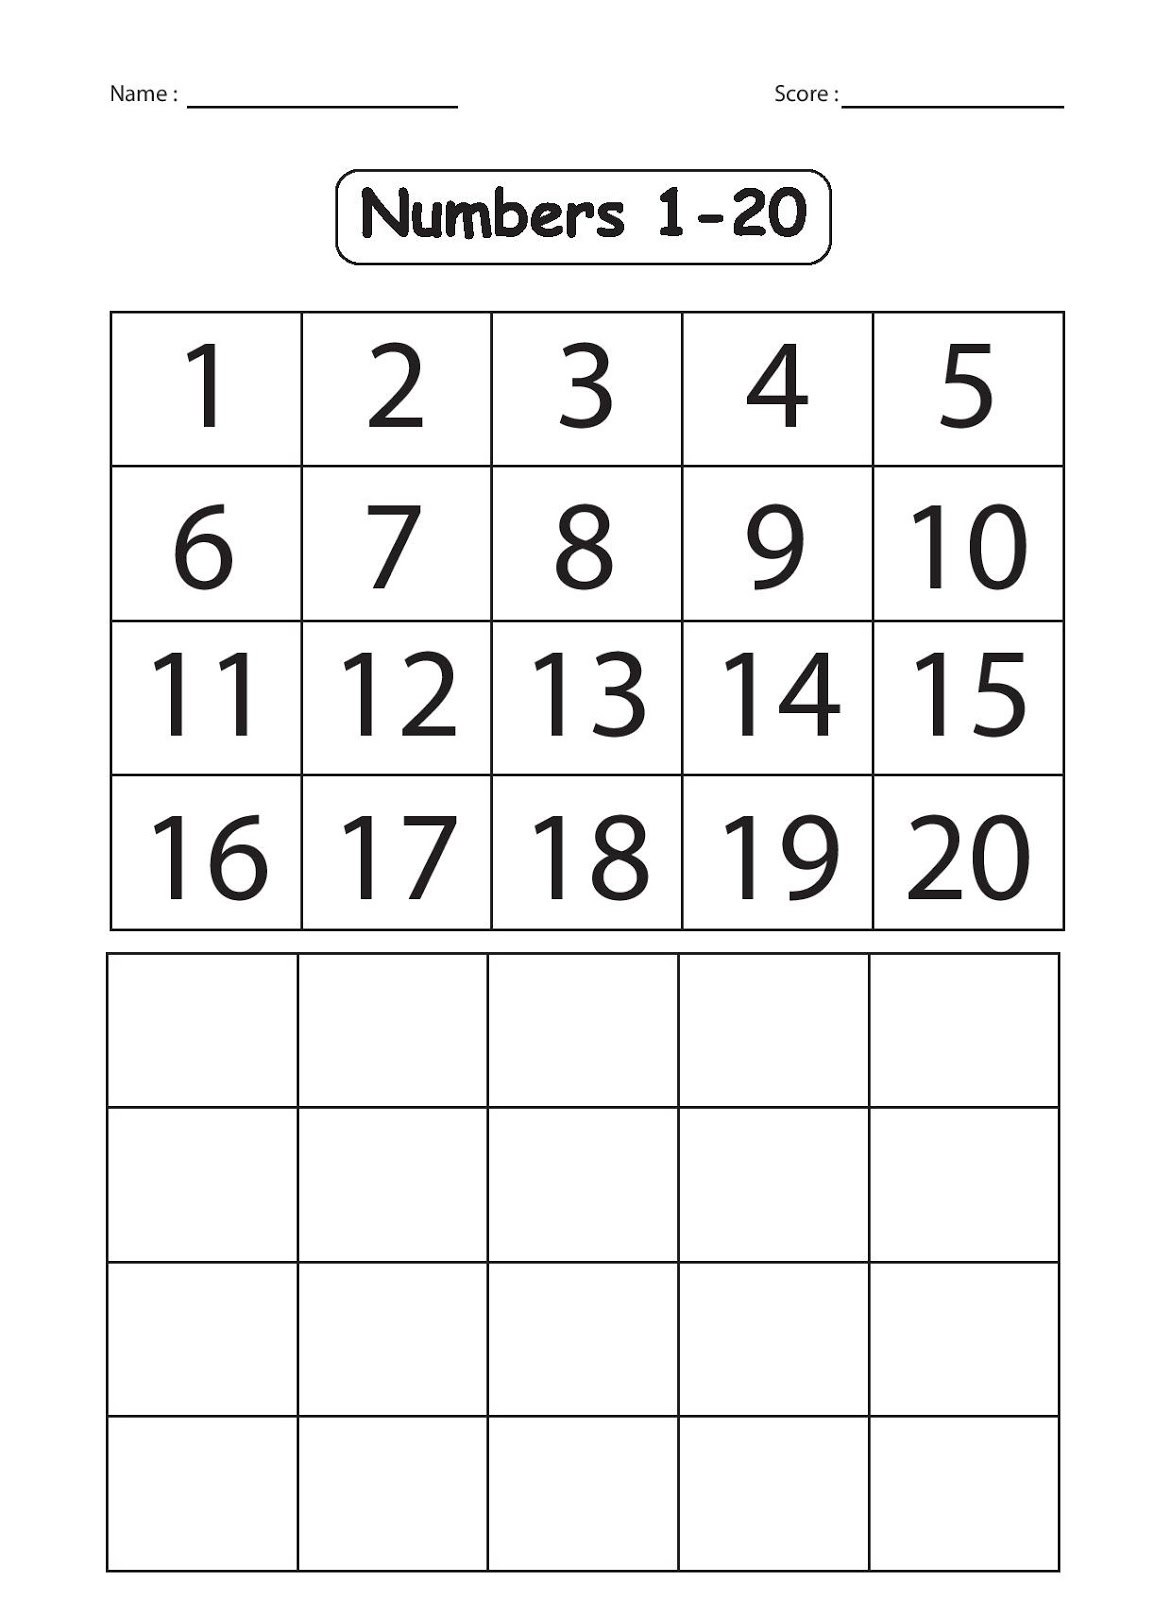 Number Writing Assessment 1 20